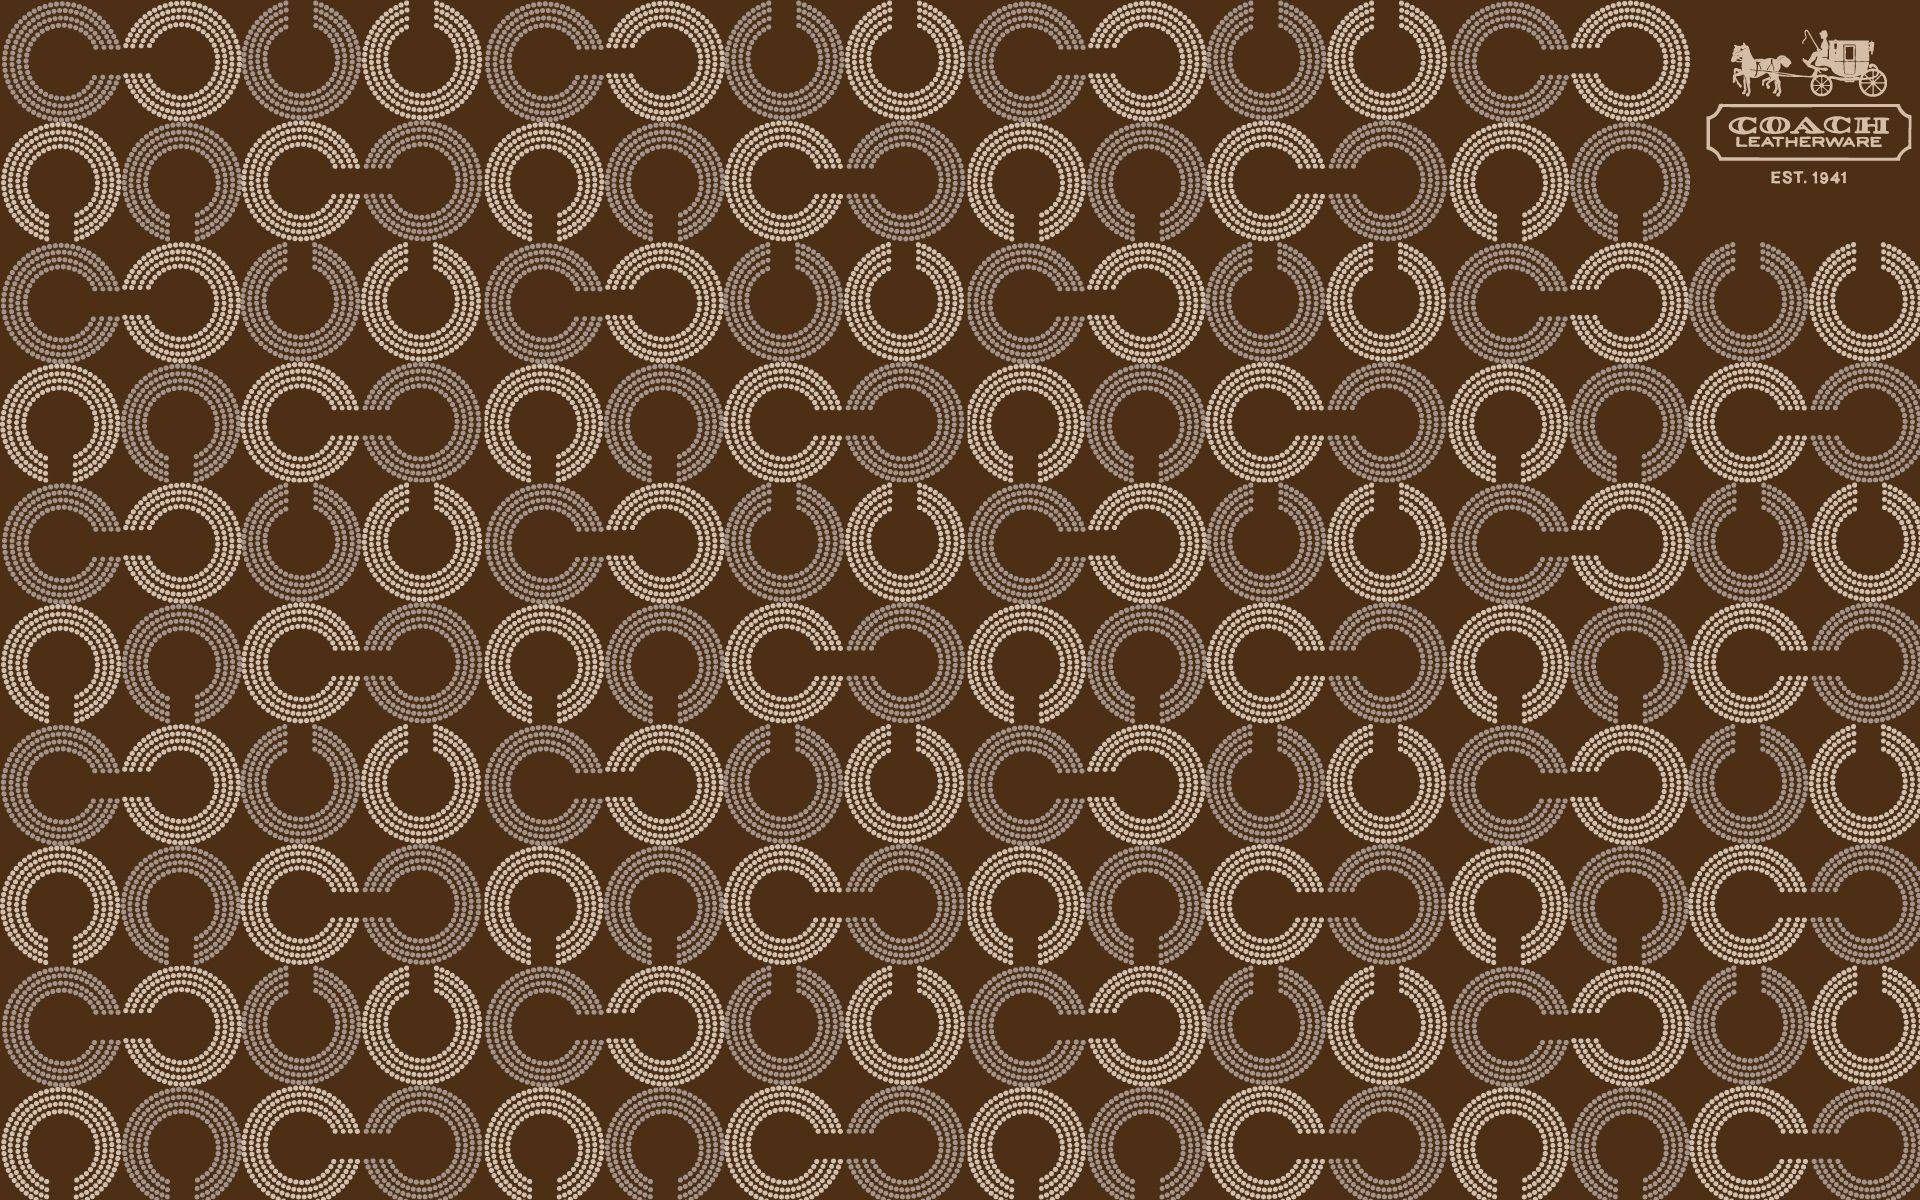 Coach 1920X1200 Wallpaper and Background Image